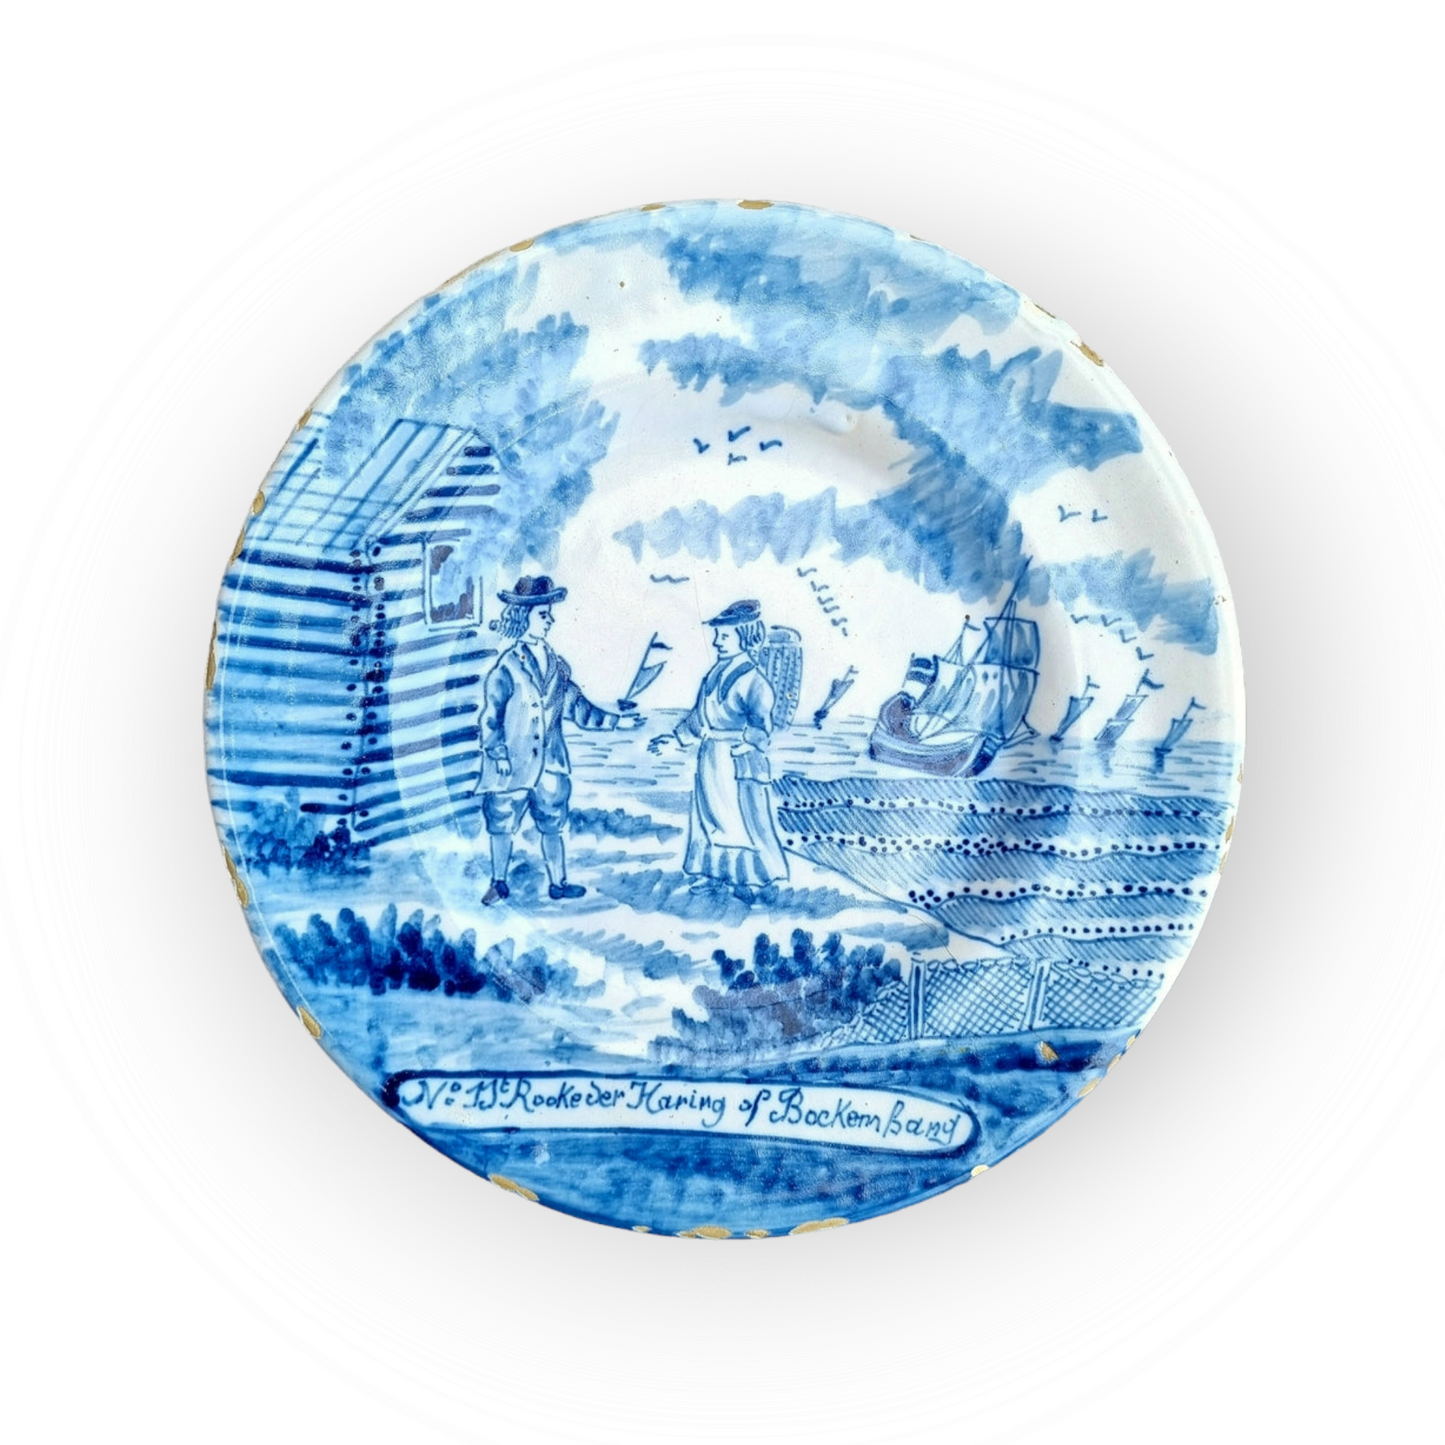 Rare Late 18th Century Dutch Antique Delftware Plate from "The Herring Catch" series of plates, circa 1780 - An almost identical example is held in the collection of The Minneapolis Institute of Art, USA